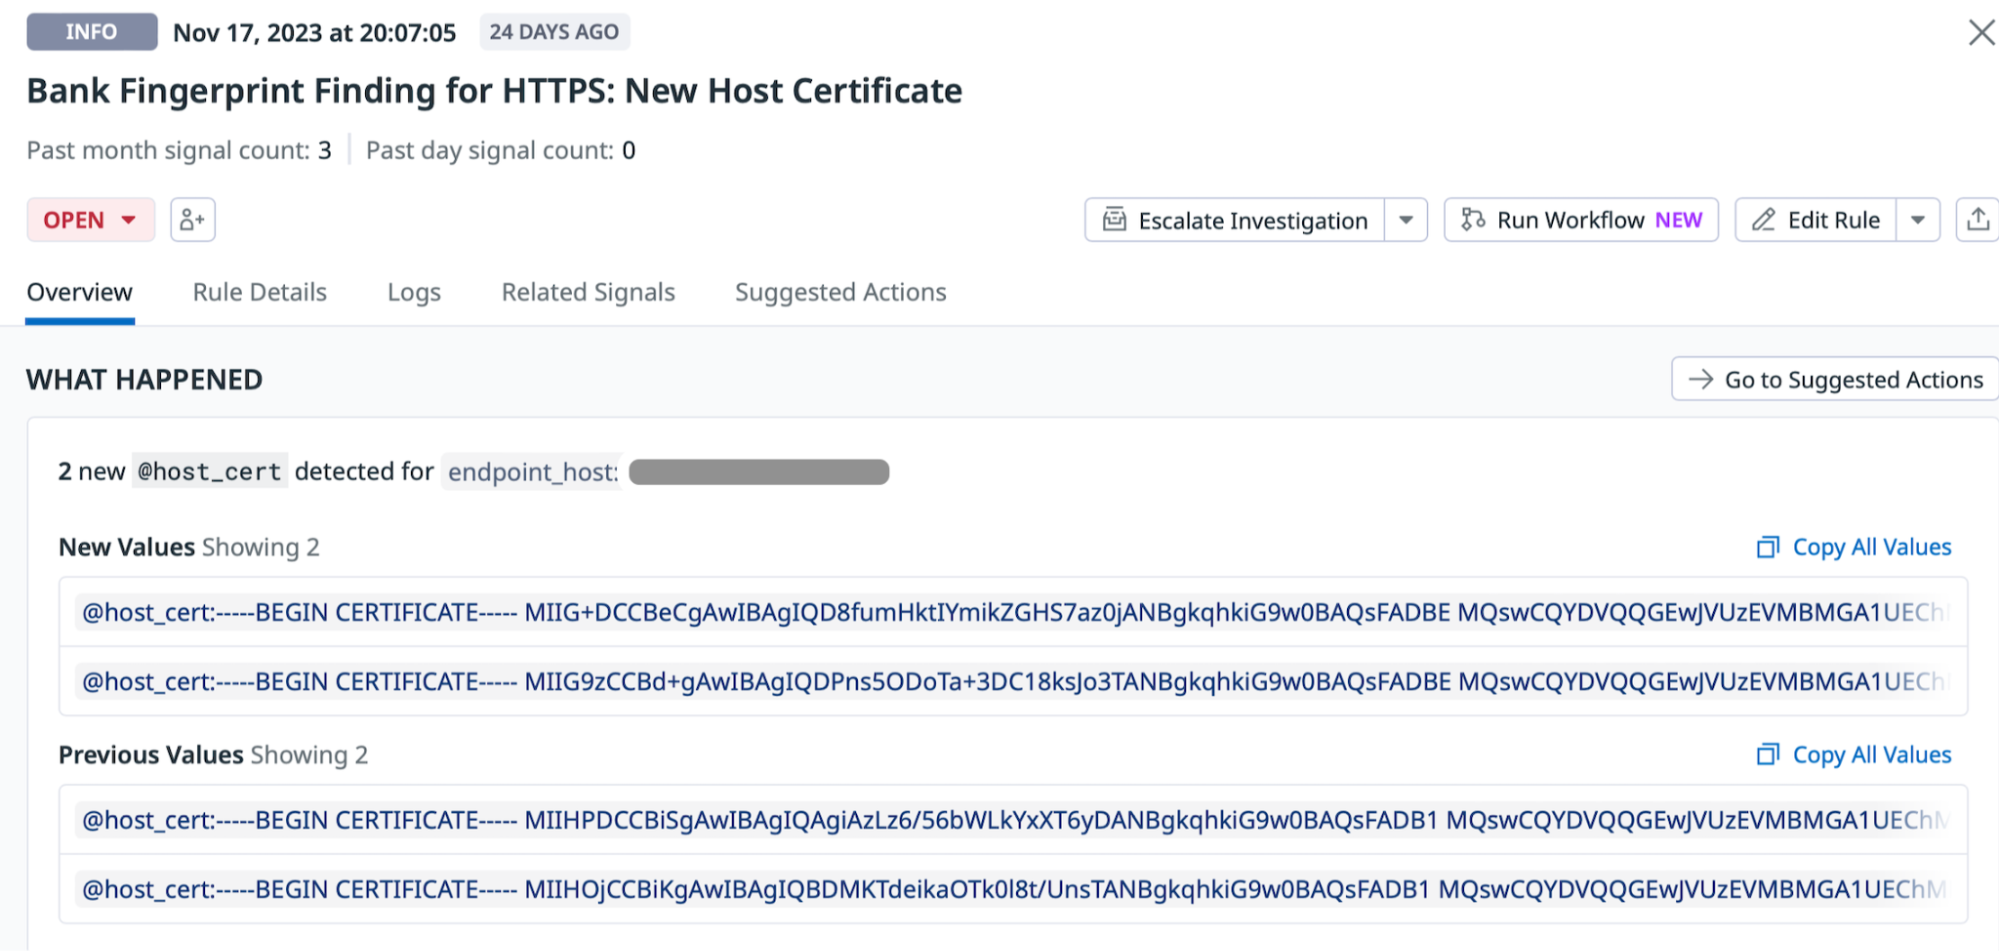 Alert of bank servers’ metadata change. In this case, the bank had rotated their server certificates.